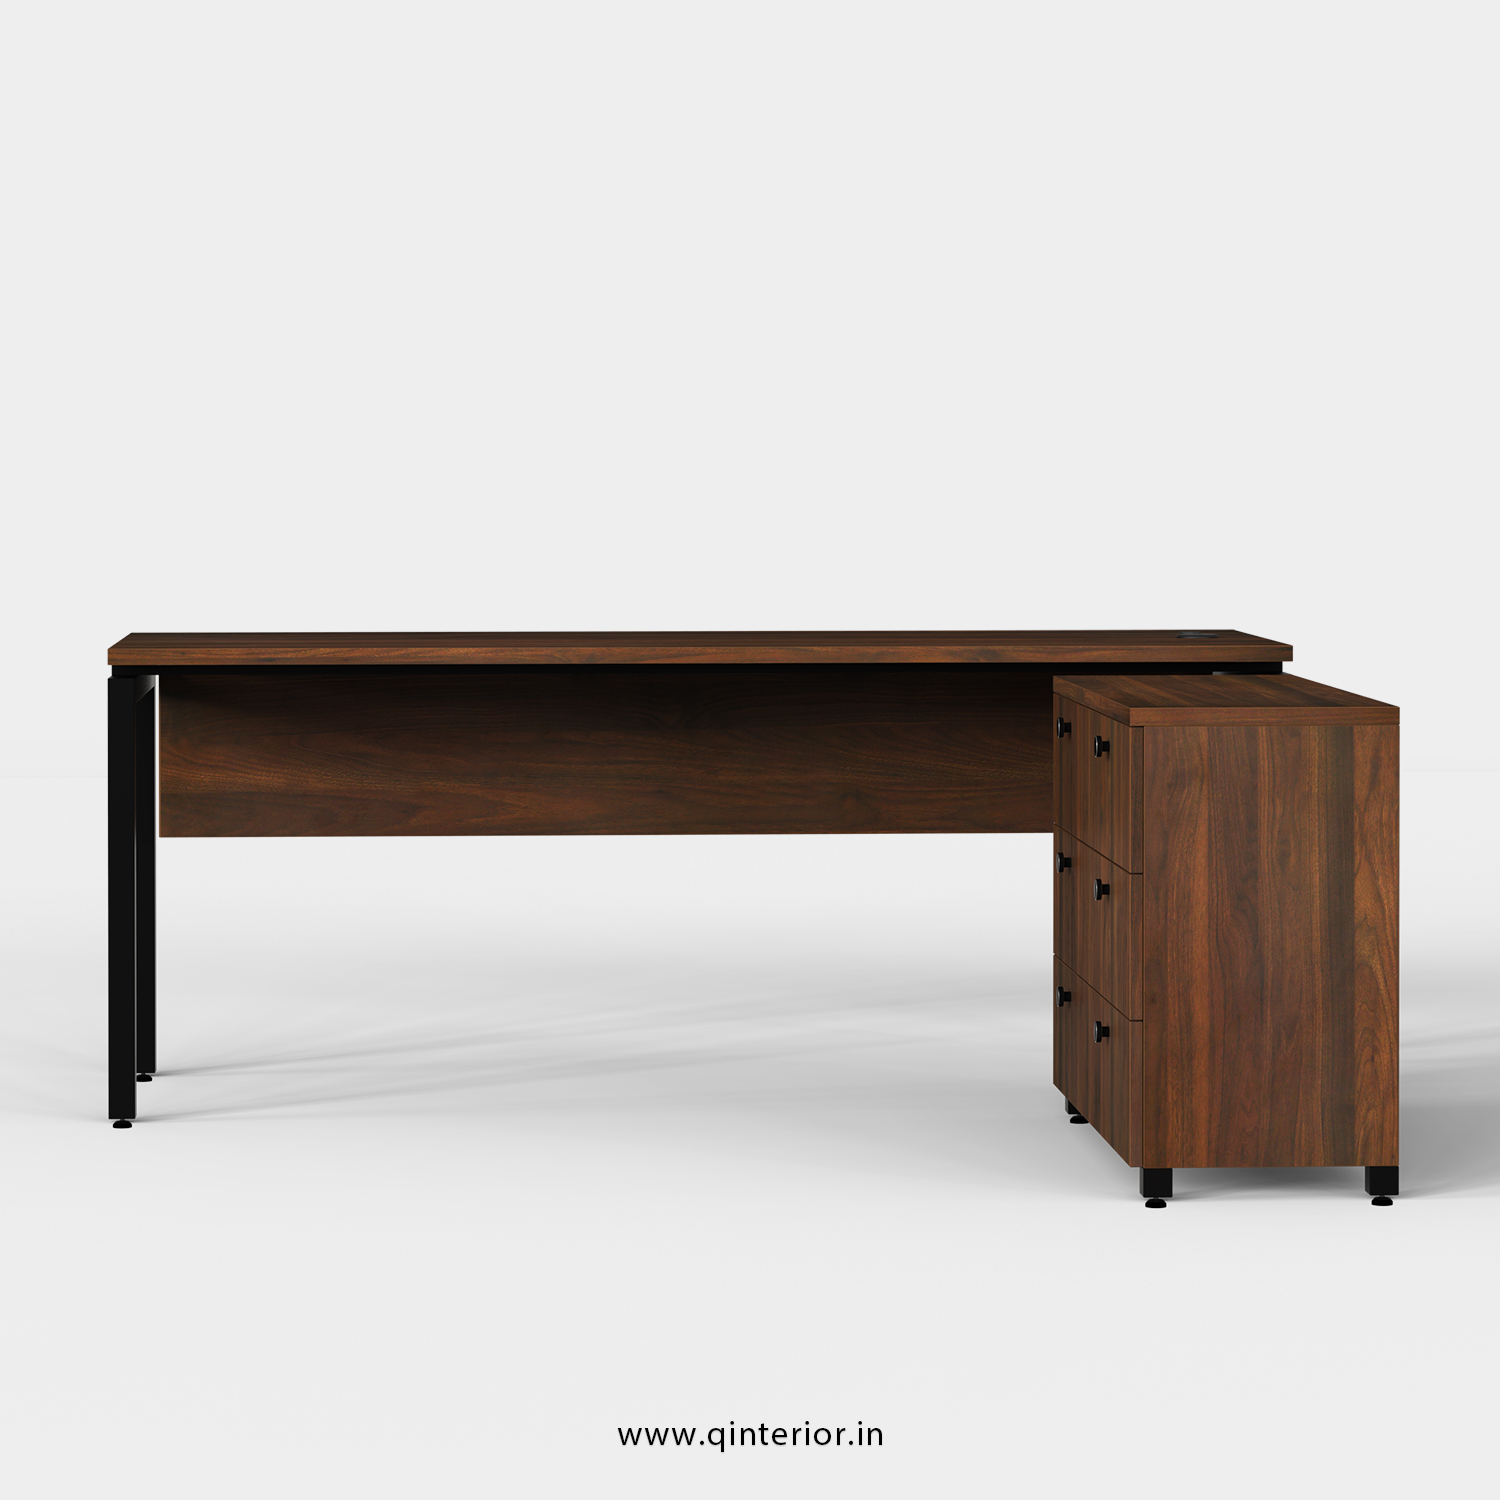 Montel Executive Table in Walnut Finish - OET104 C1